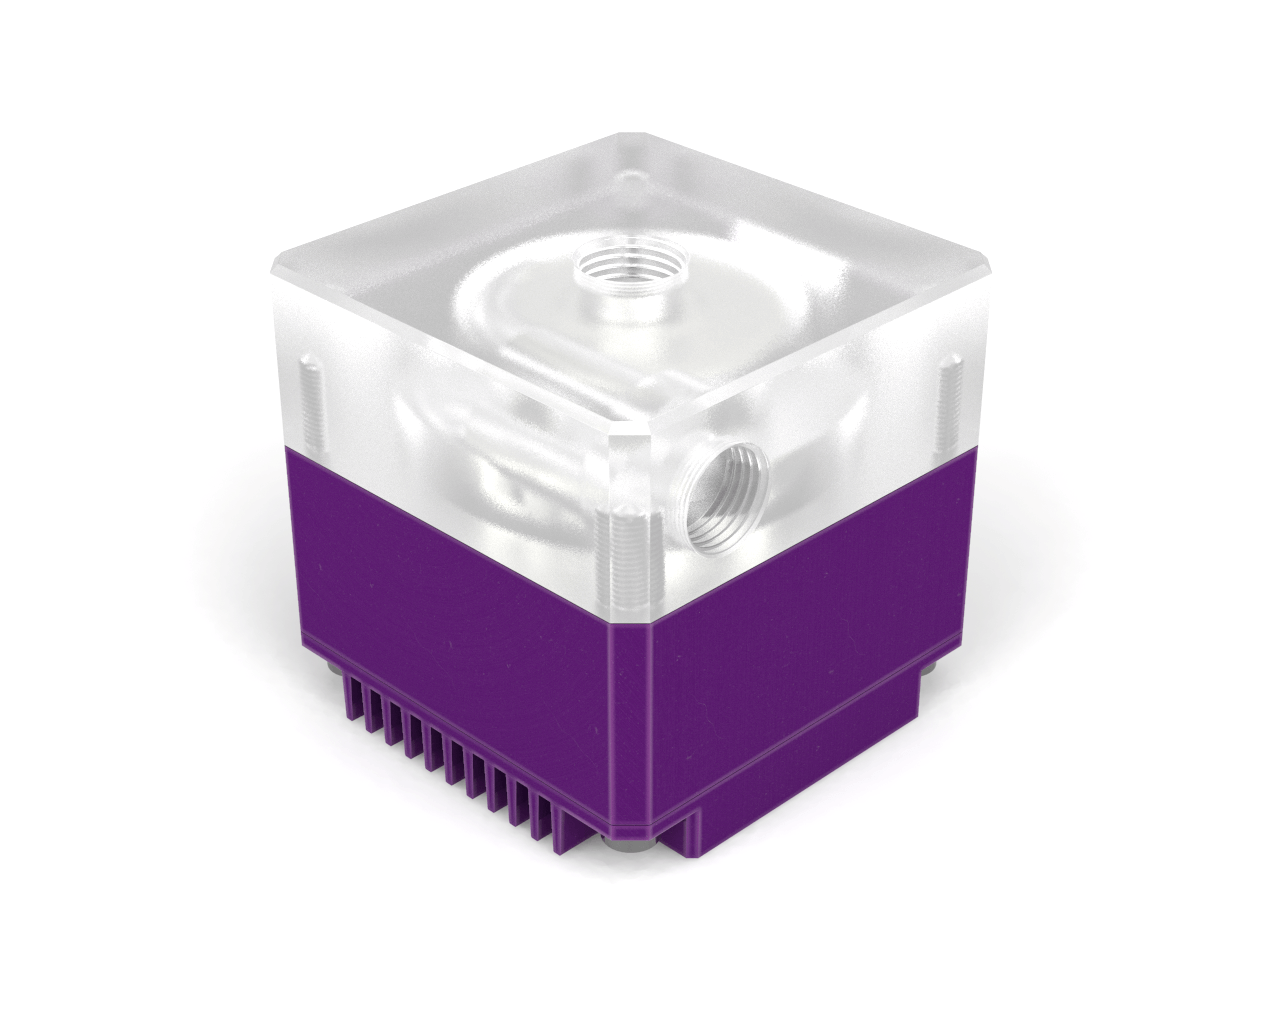 PrimoChill Enhanced SX DDC Liquid Cooling 12V Pump Kit - PWM Enabled - PrimoChill - KEEPING IT COOL Candy Purple